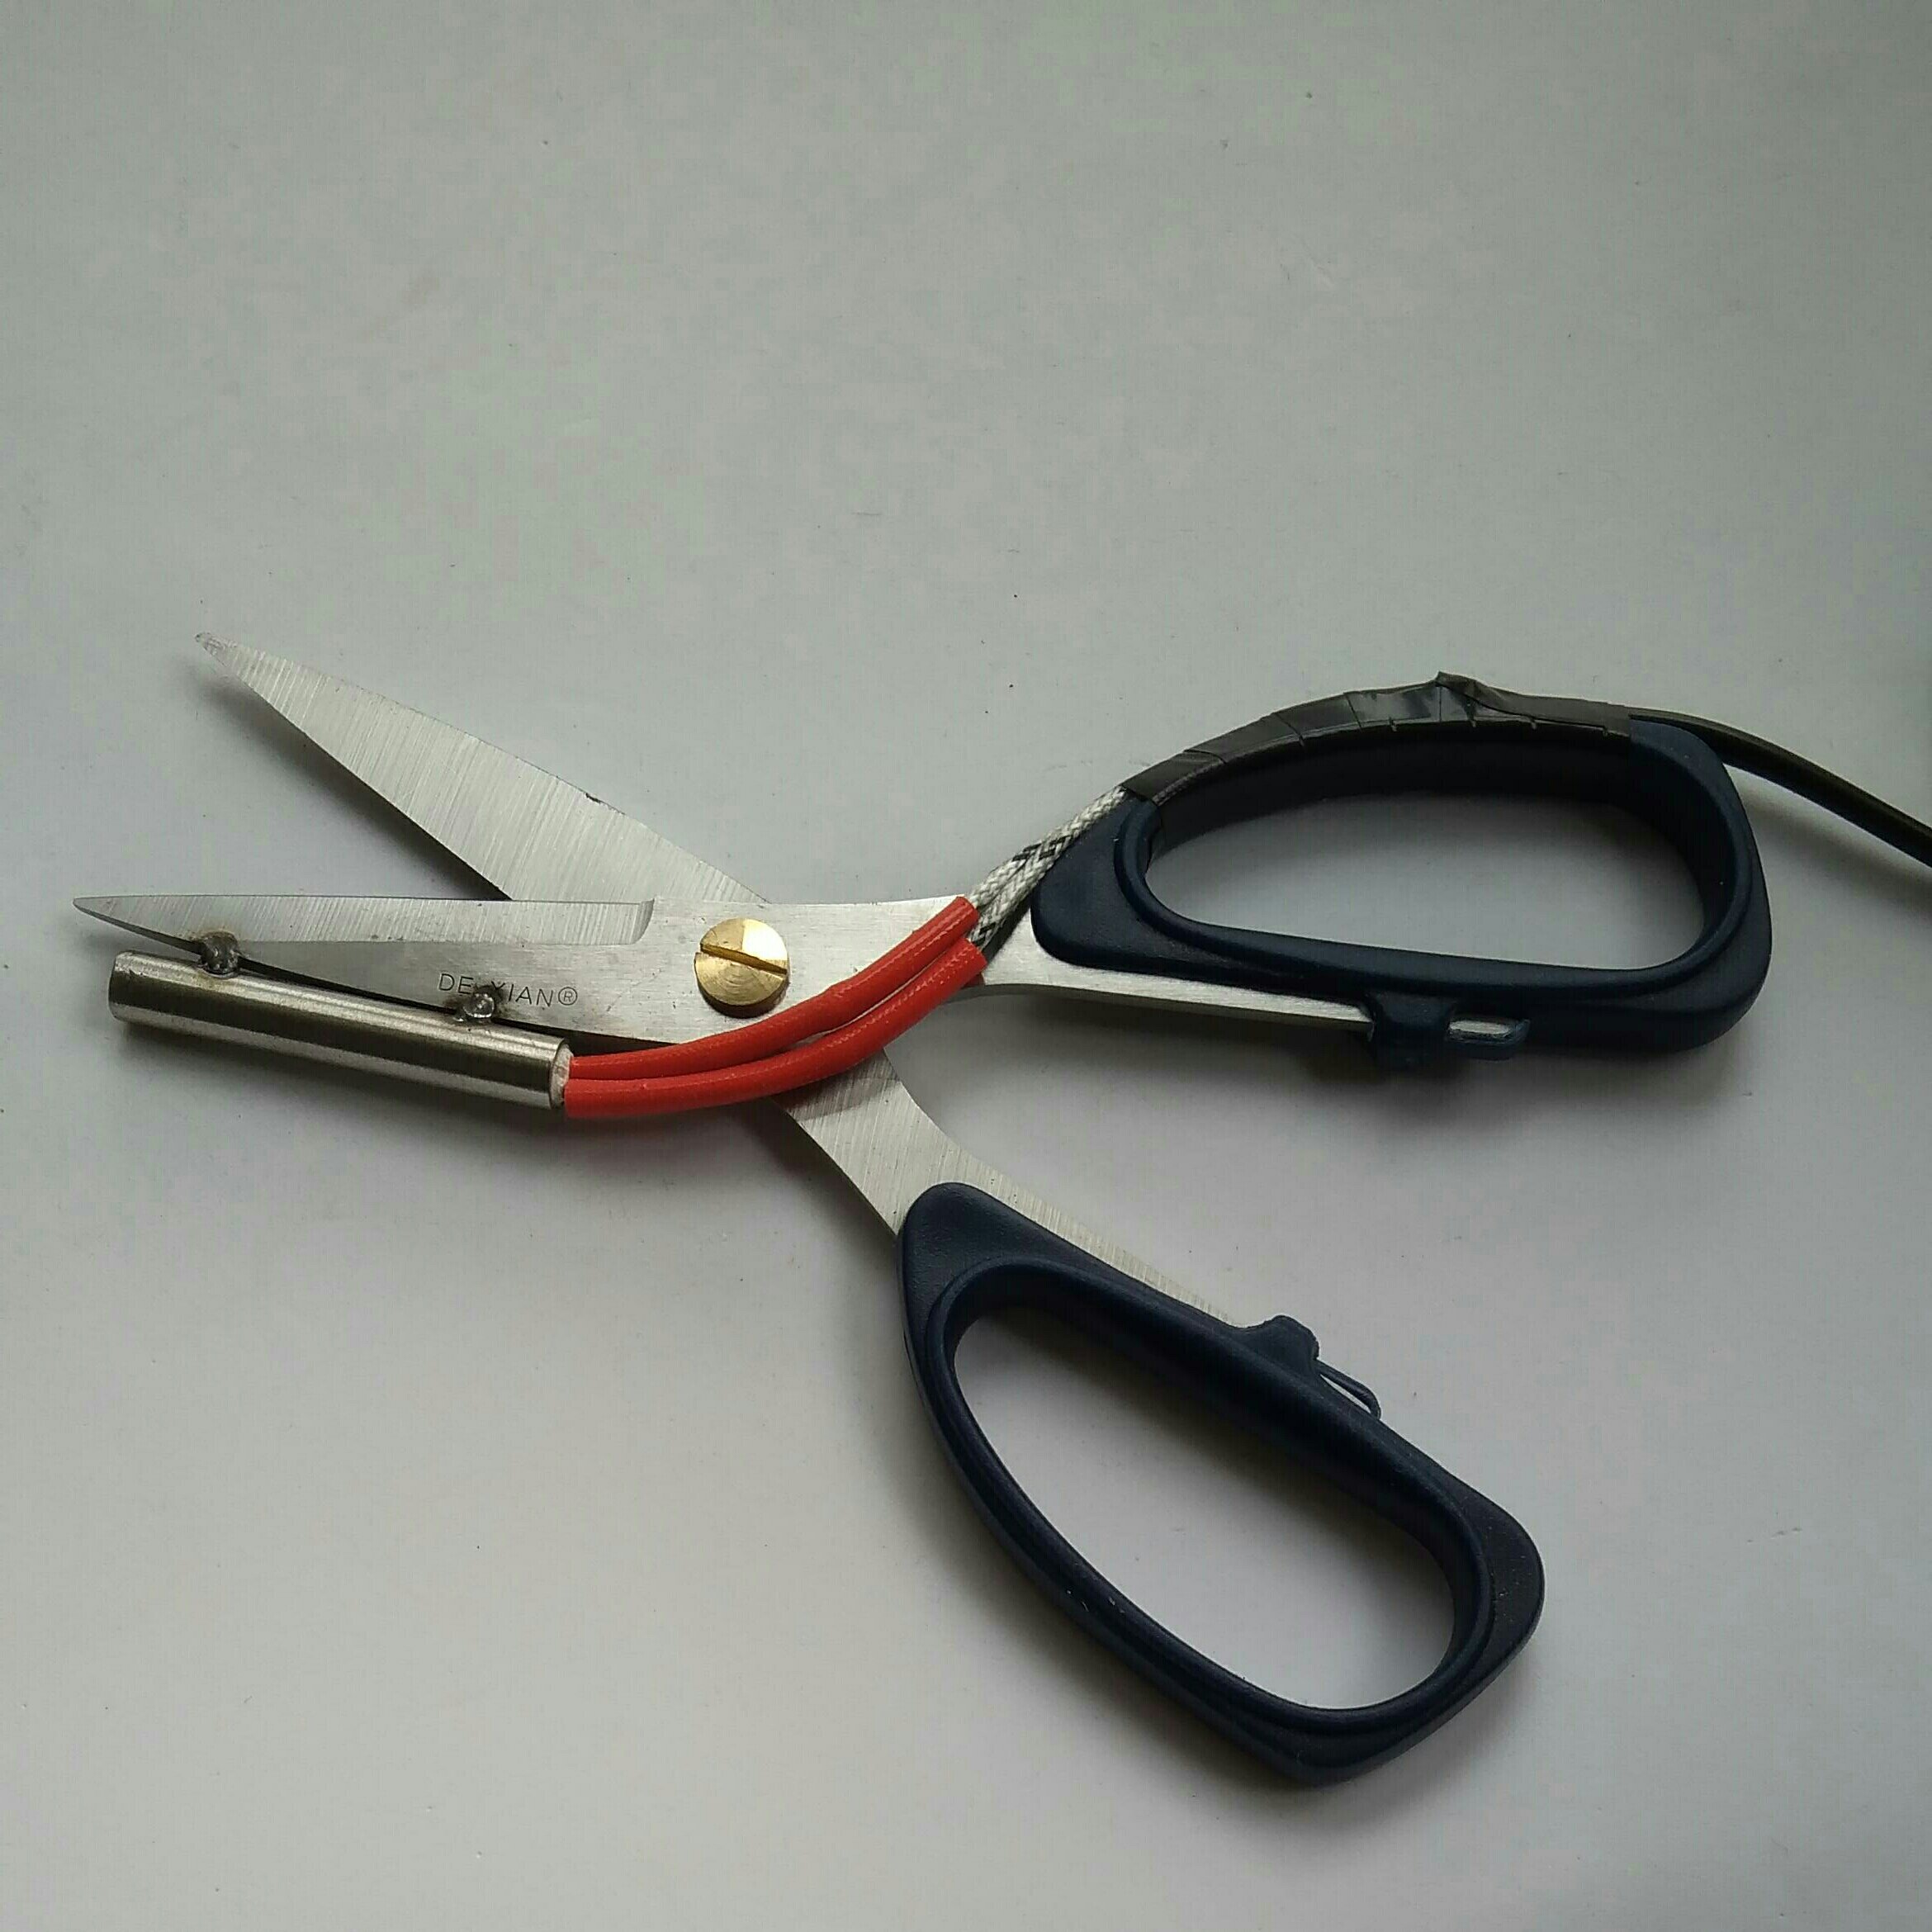 

Electric Heating Tailor Scissors Power Hot Shears Knifee Heated Pen Working Indicator For Cloth Cutting